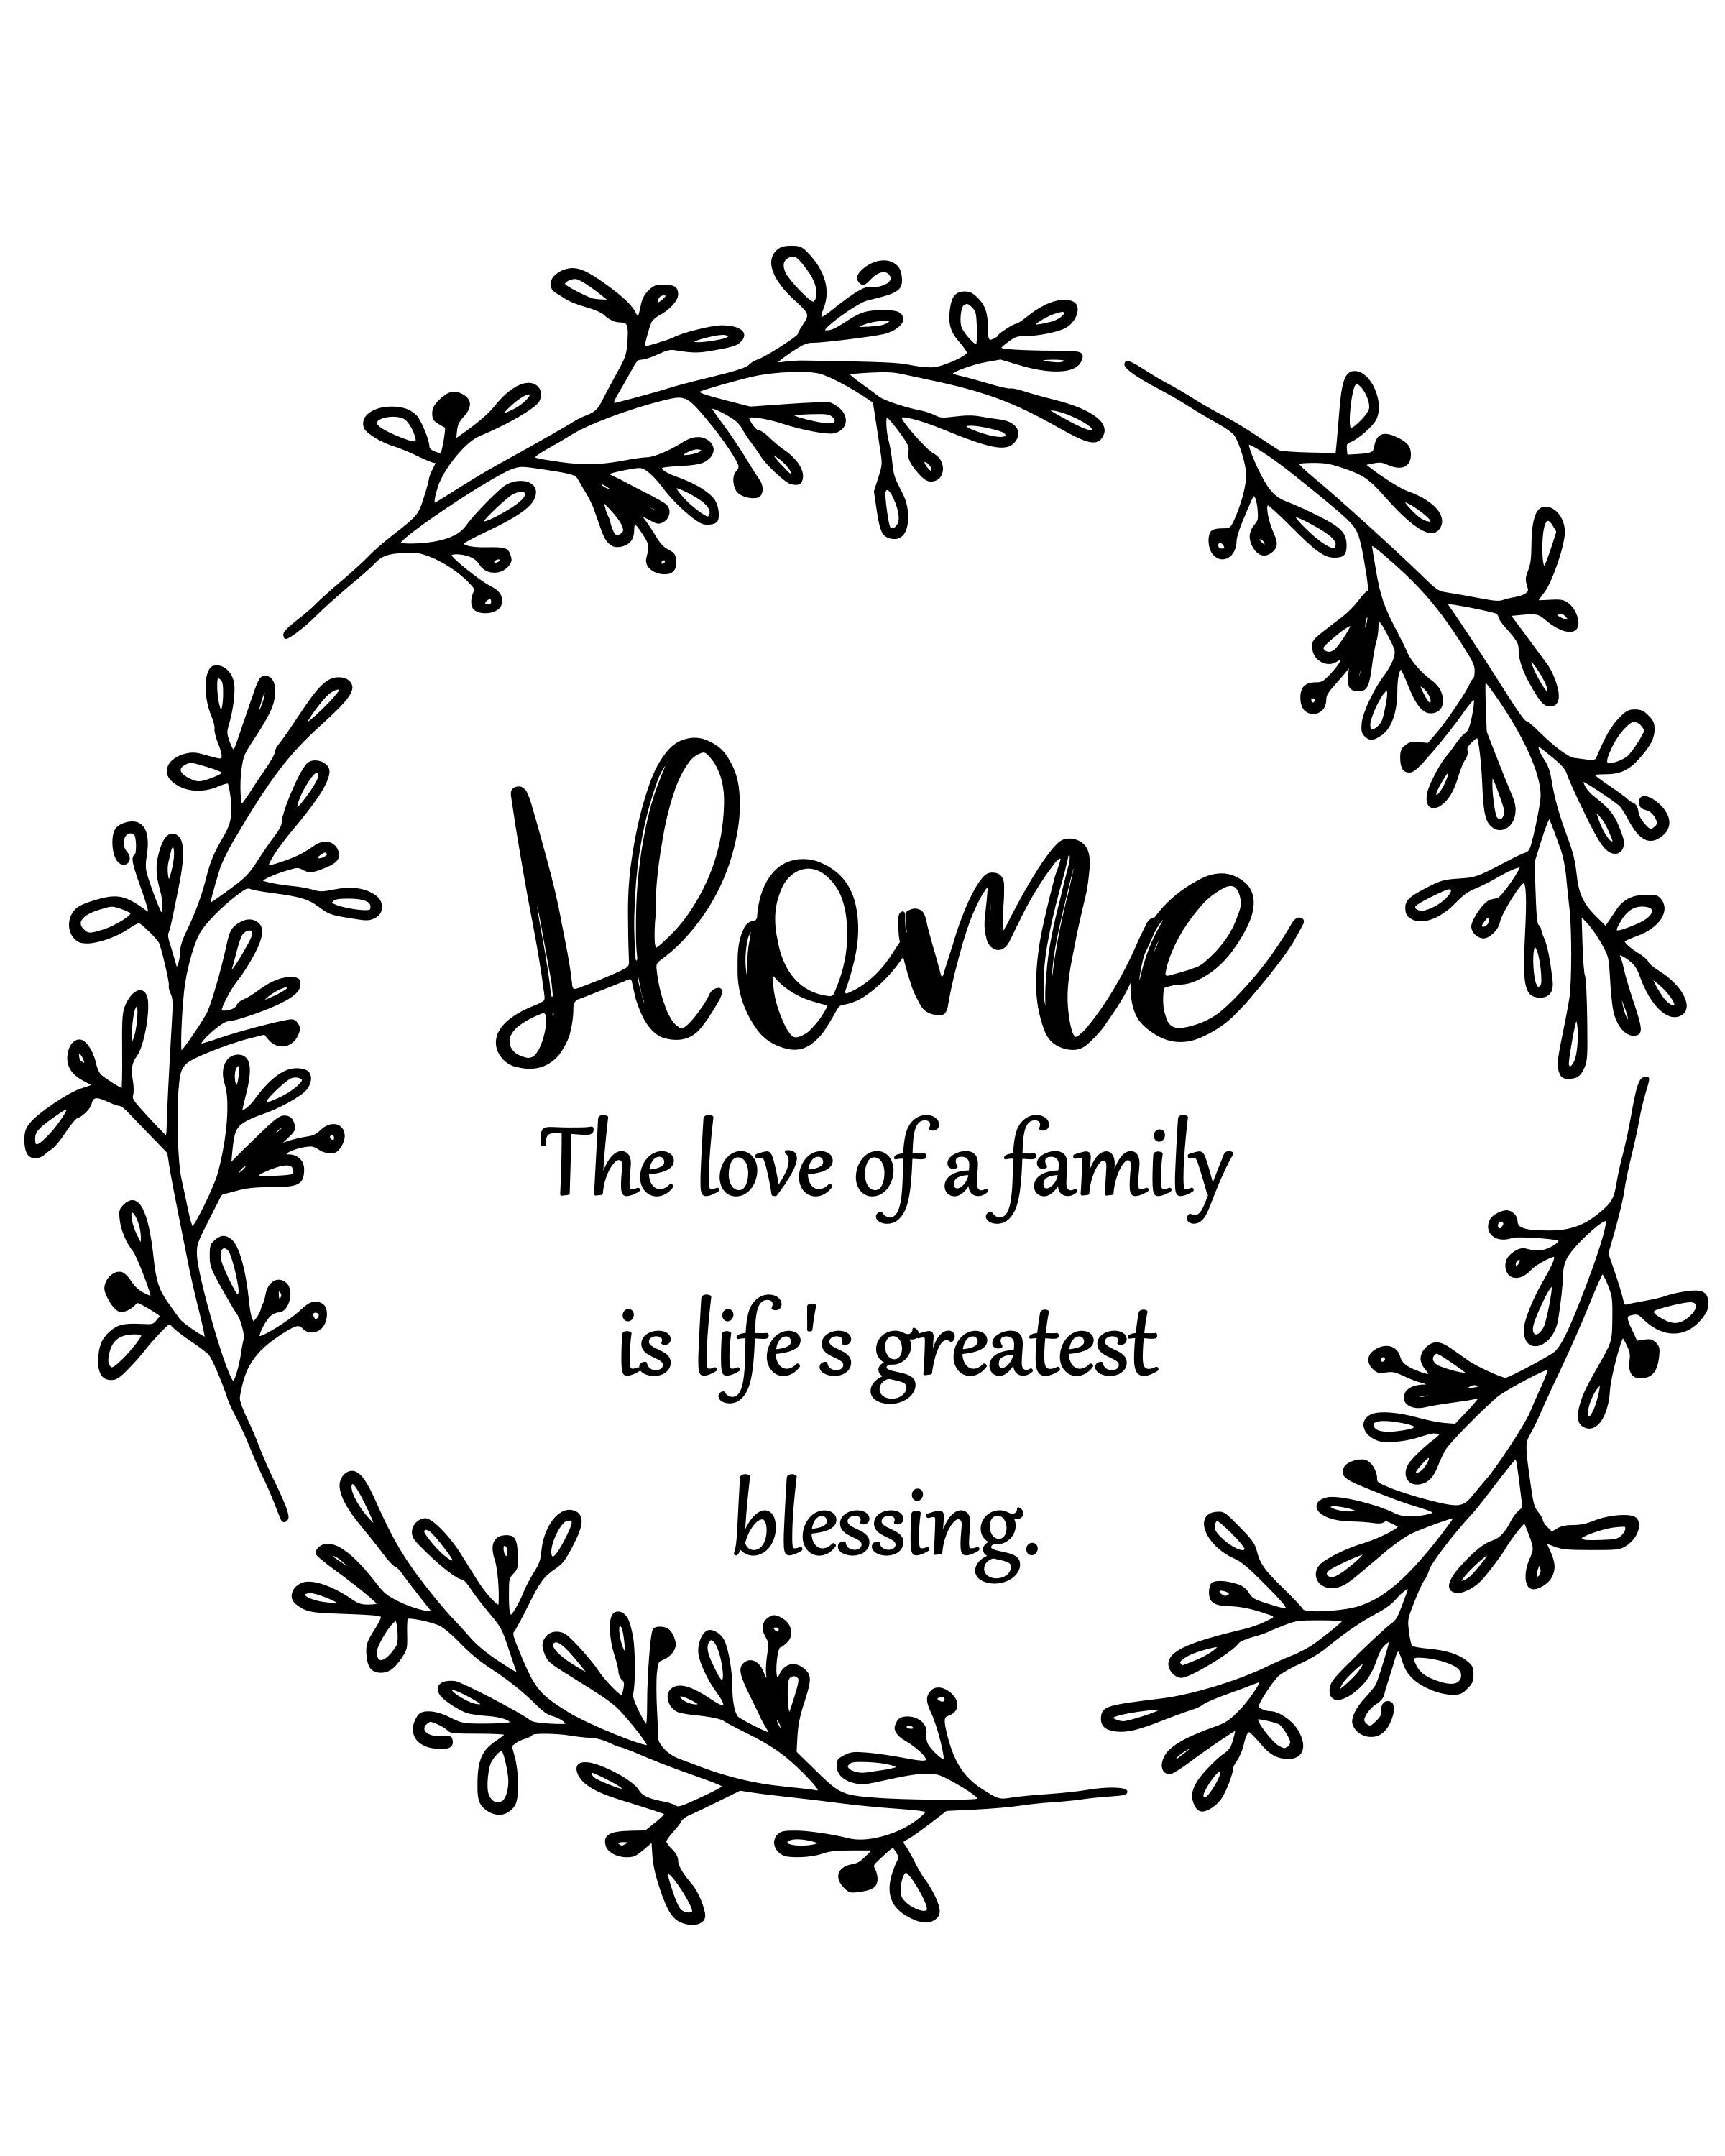 Home The love of a family is life's greatest blessing | Etsy